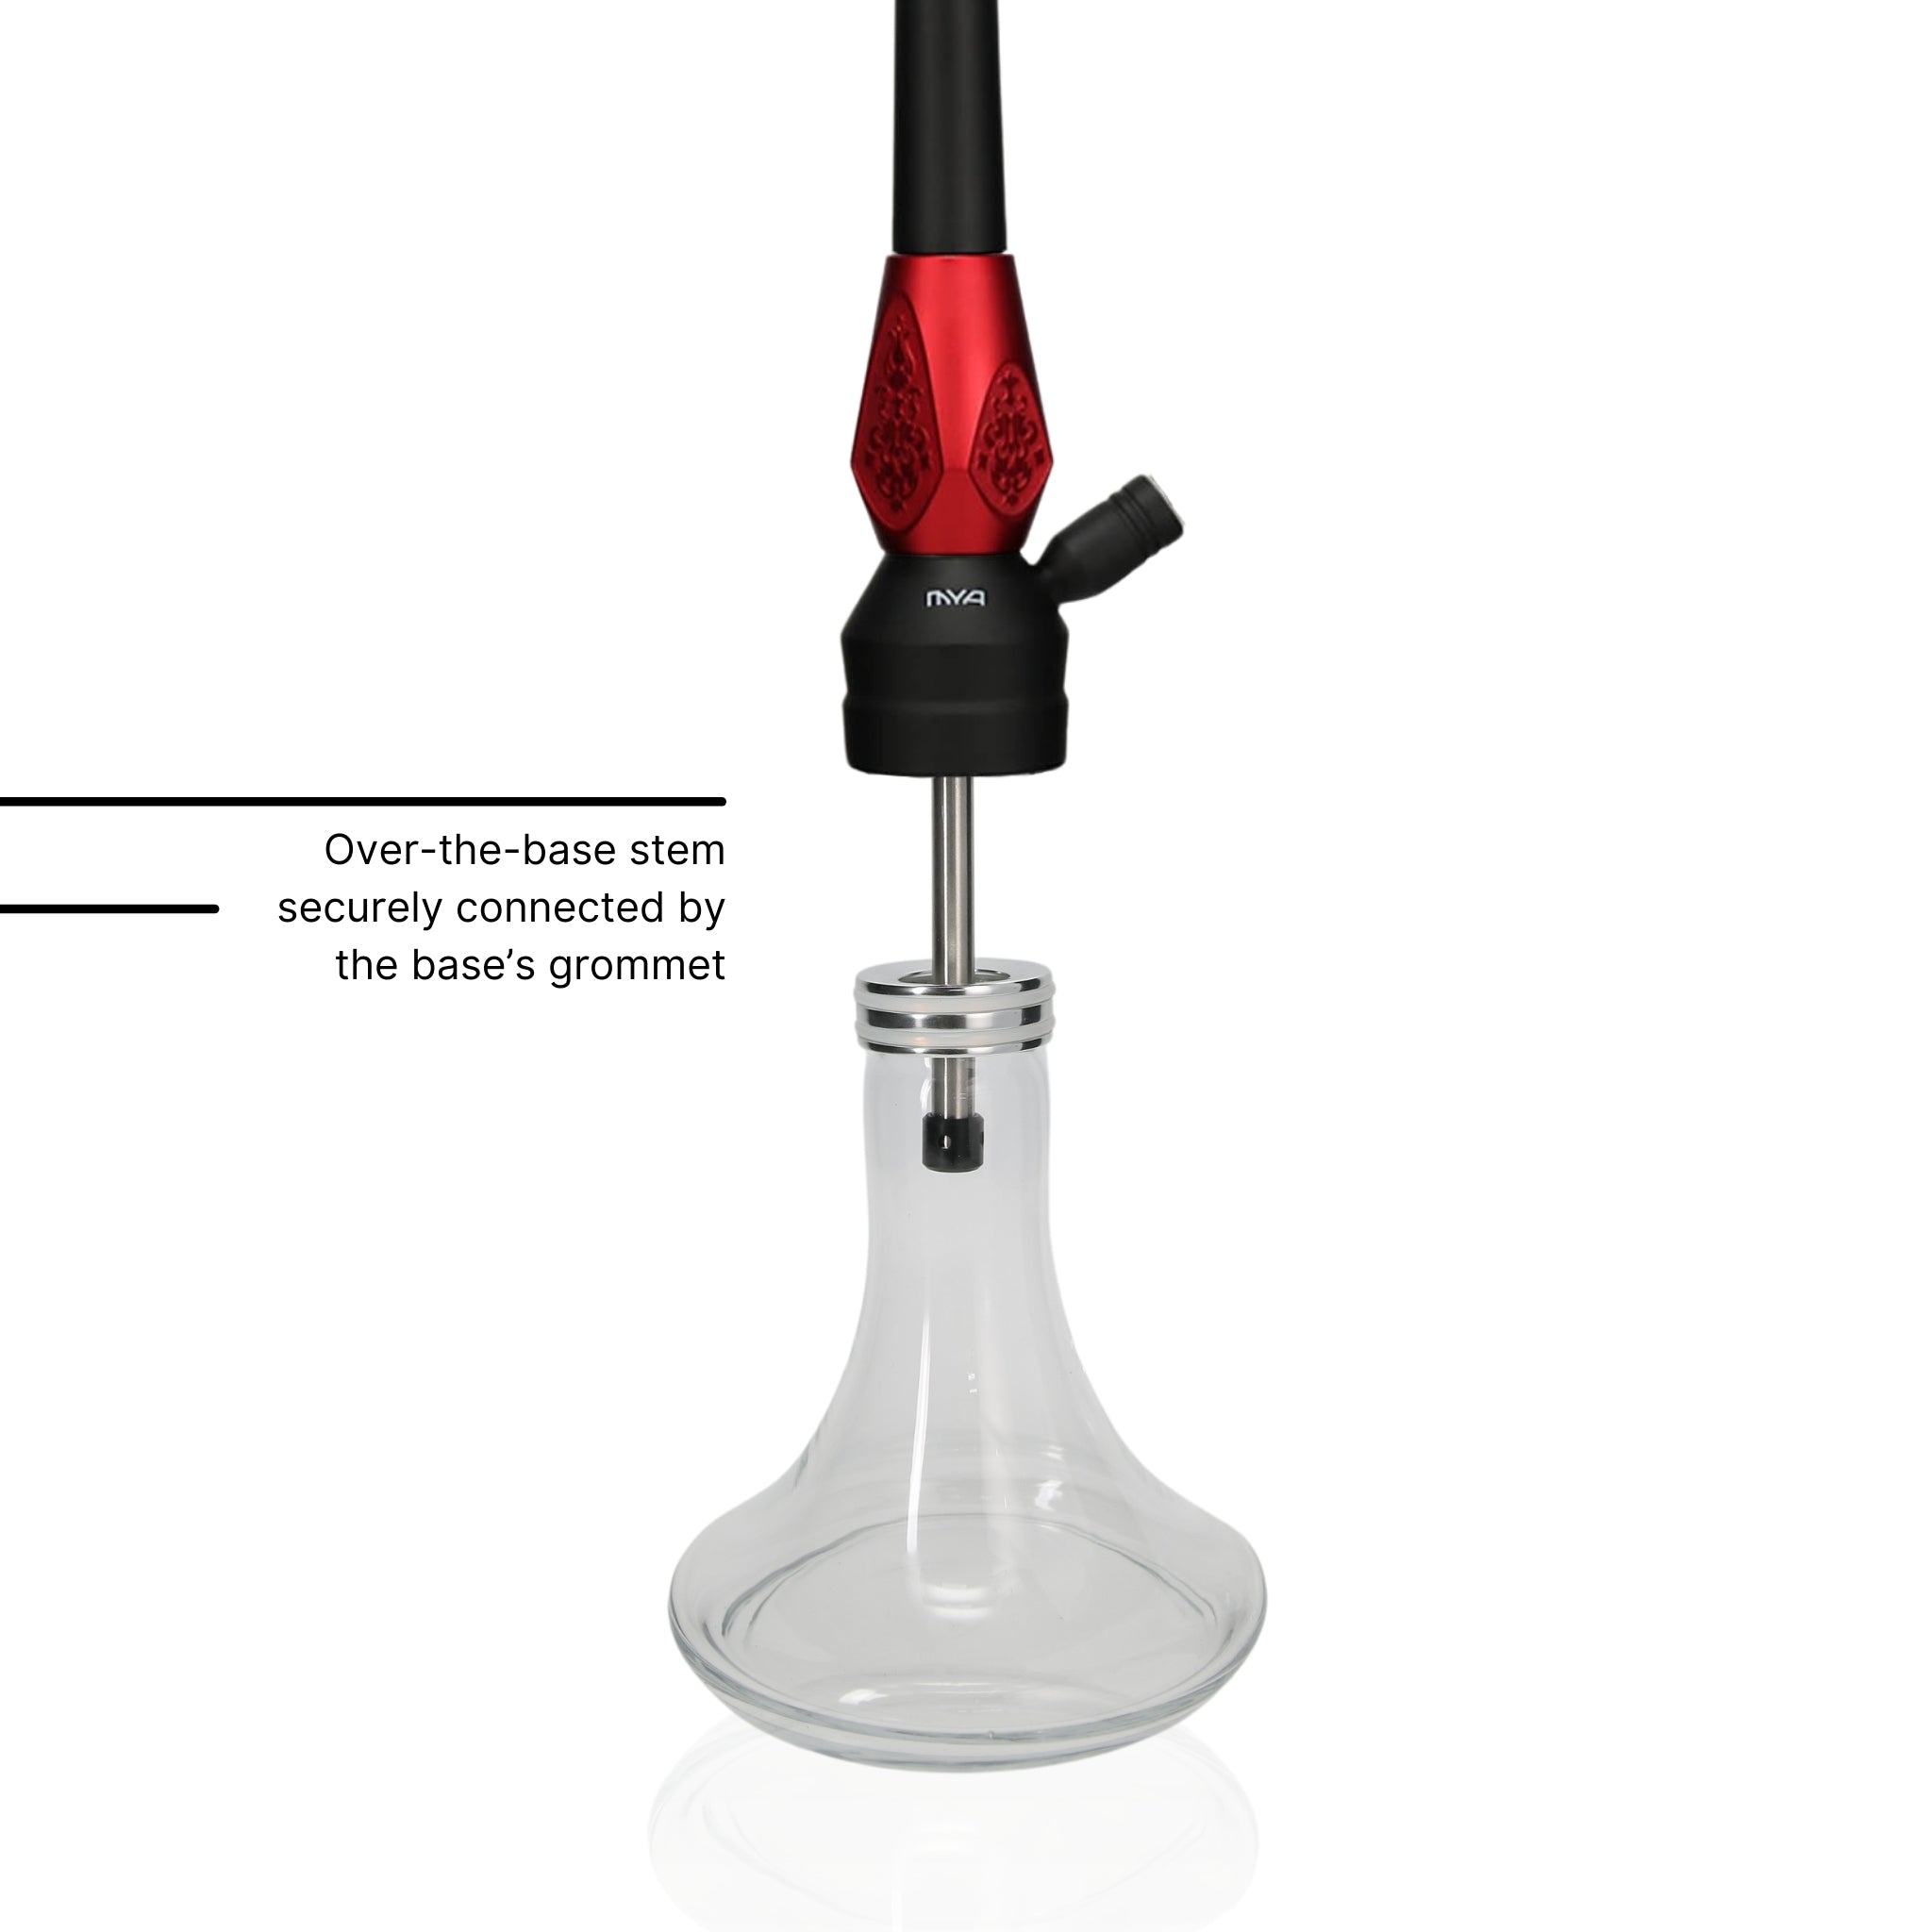 Red ORO-MX-1A3 MYA Hookah #color_Red